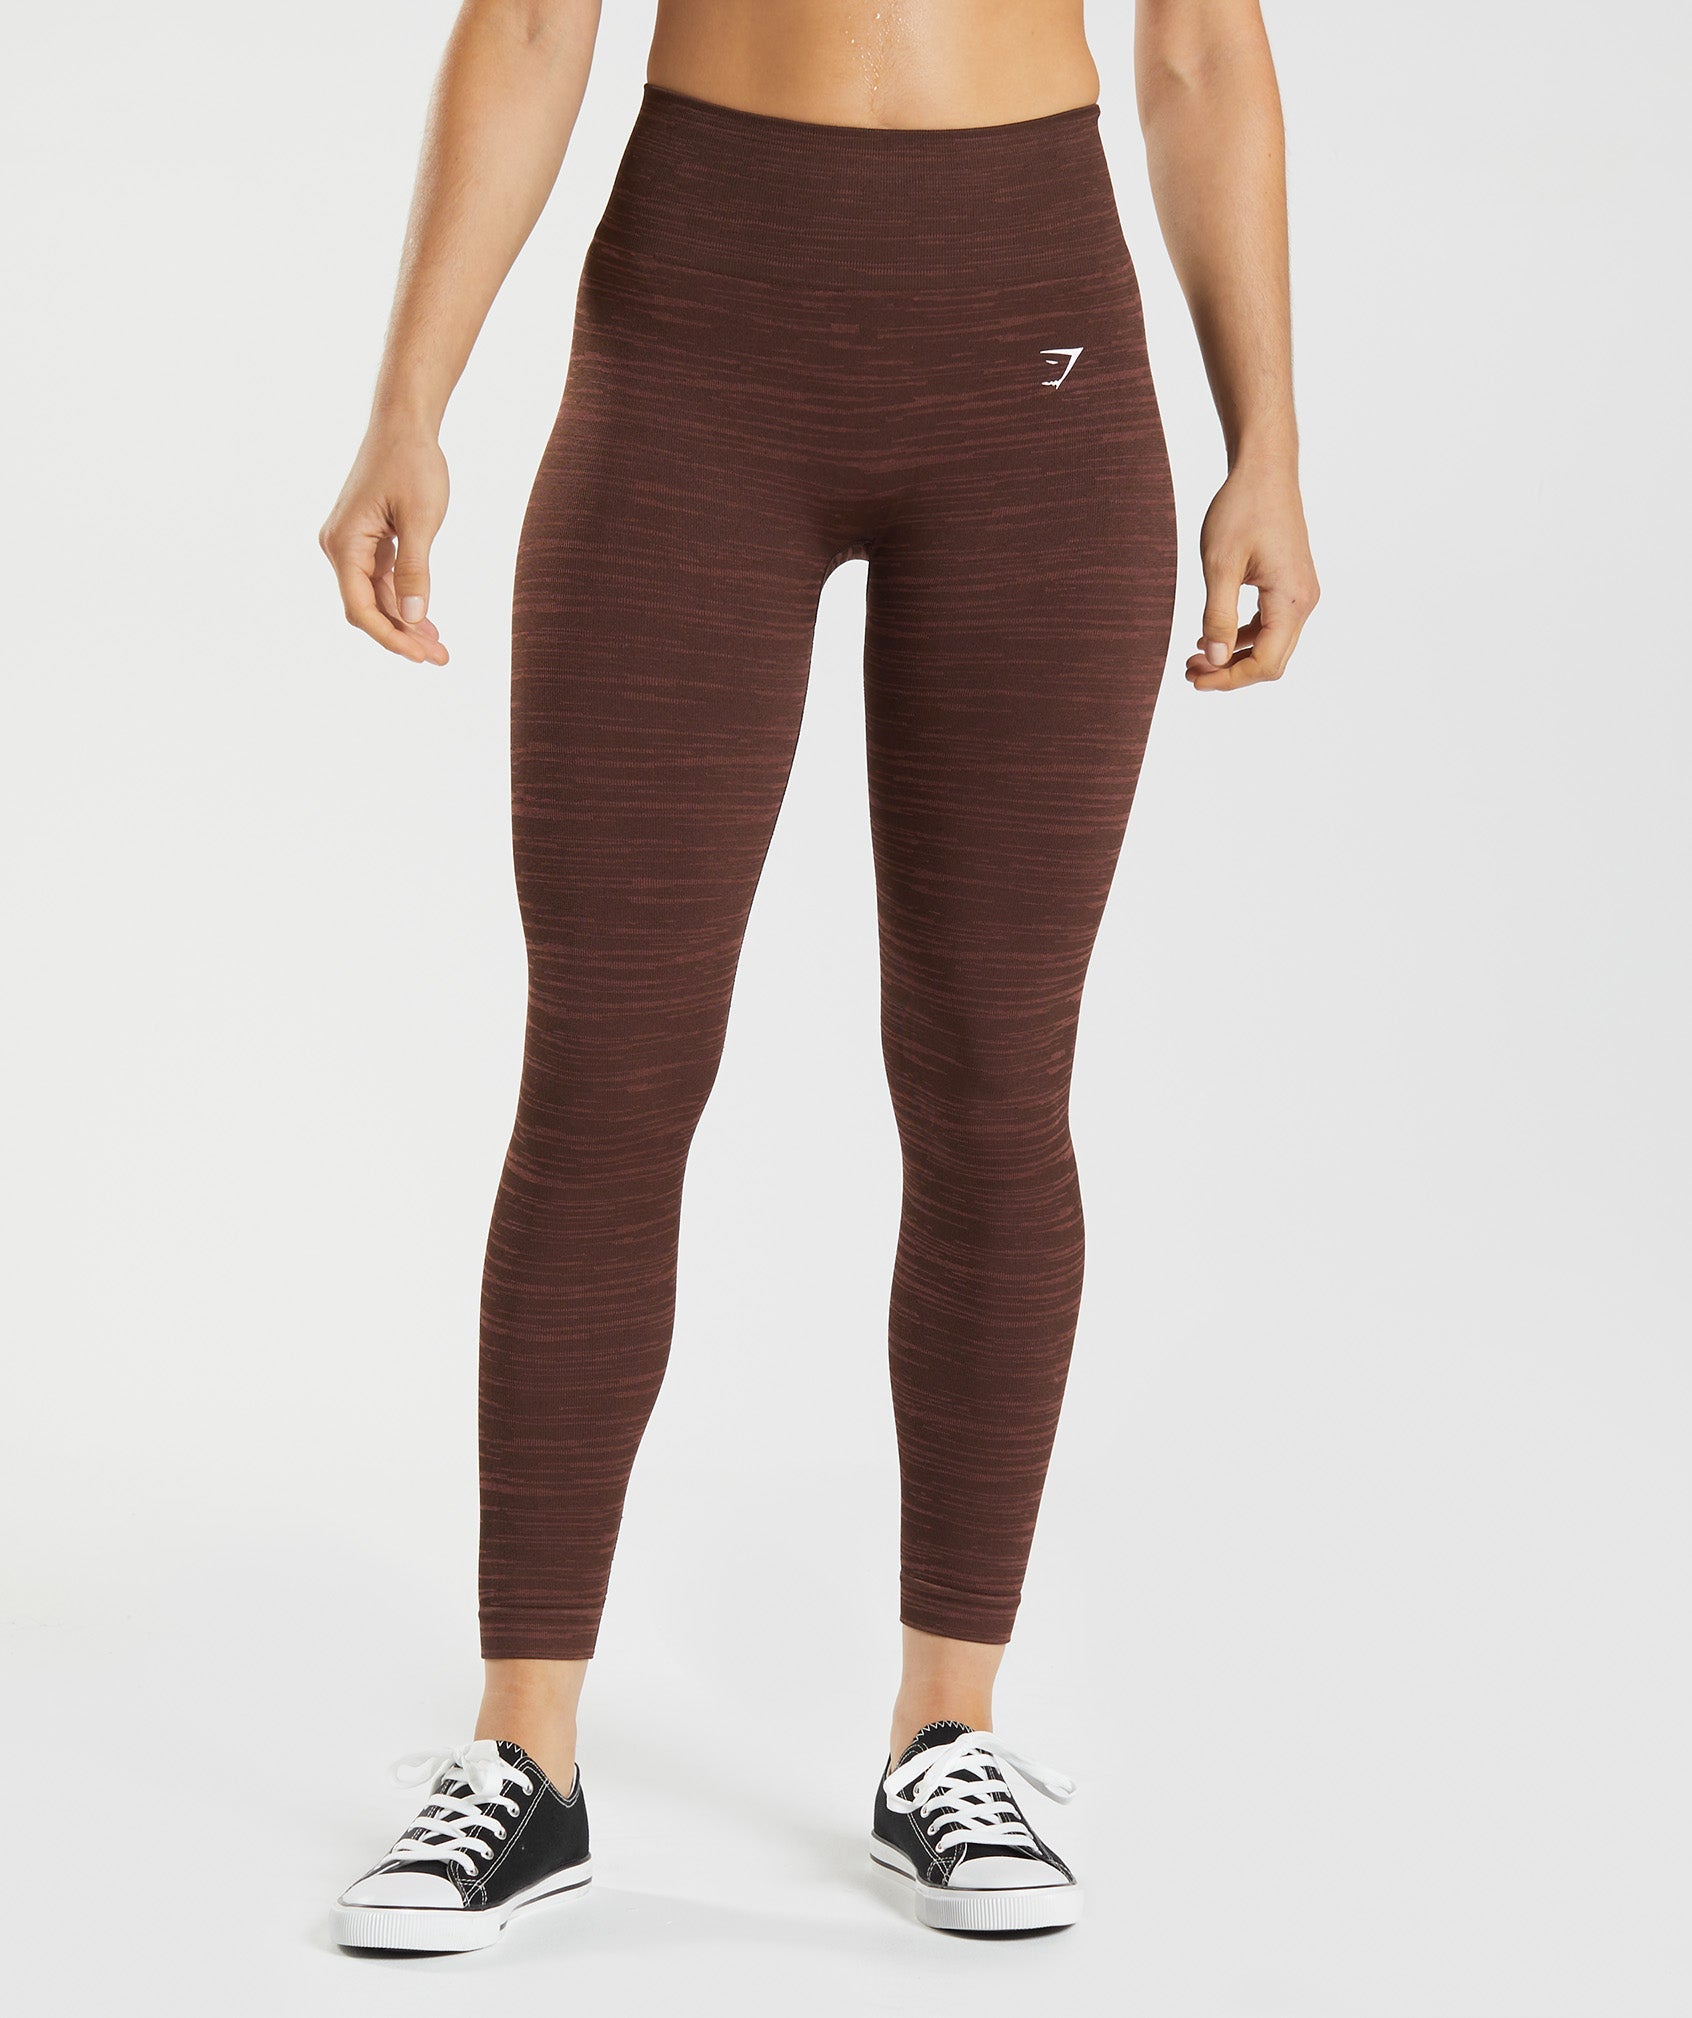 Gymshark Leggings Sale  International Society of Precision Agriculture